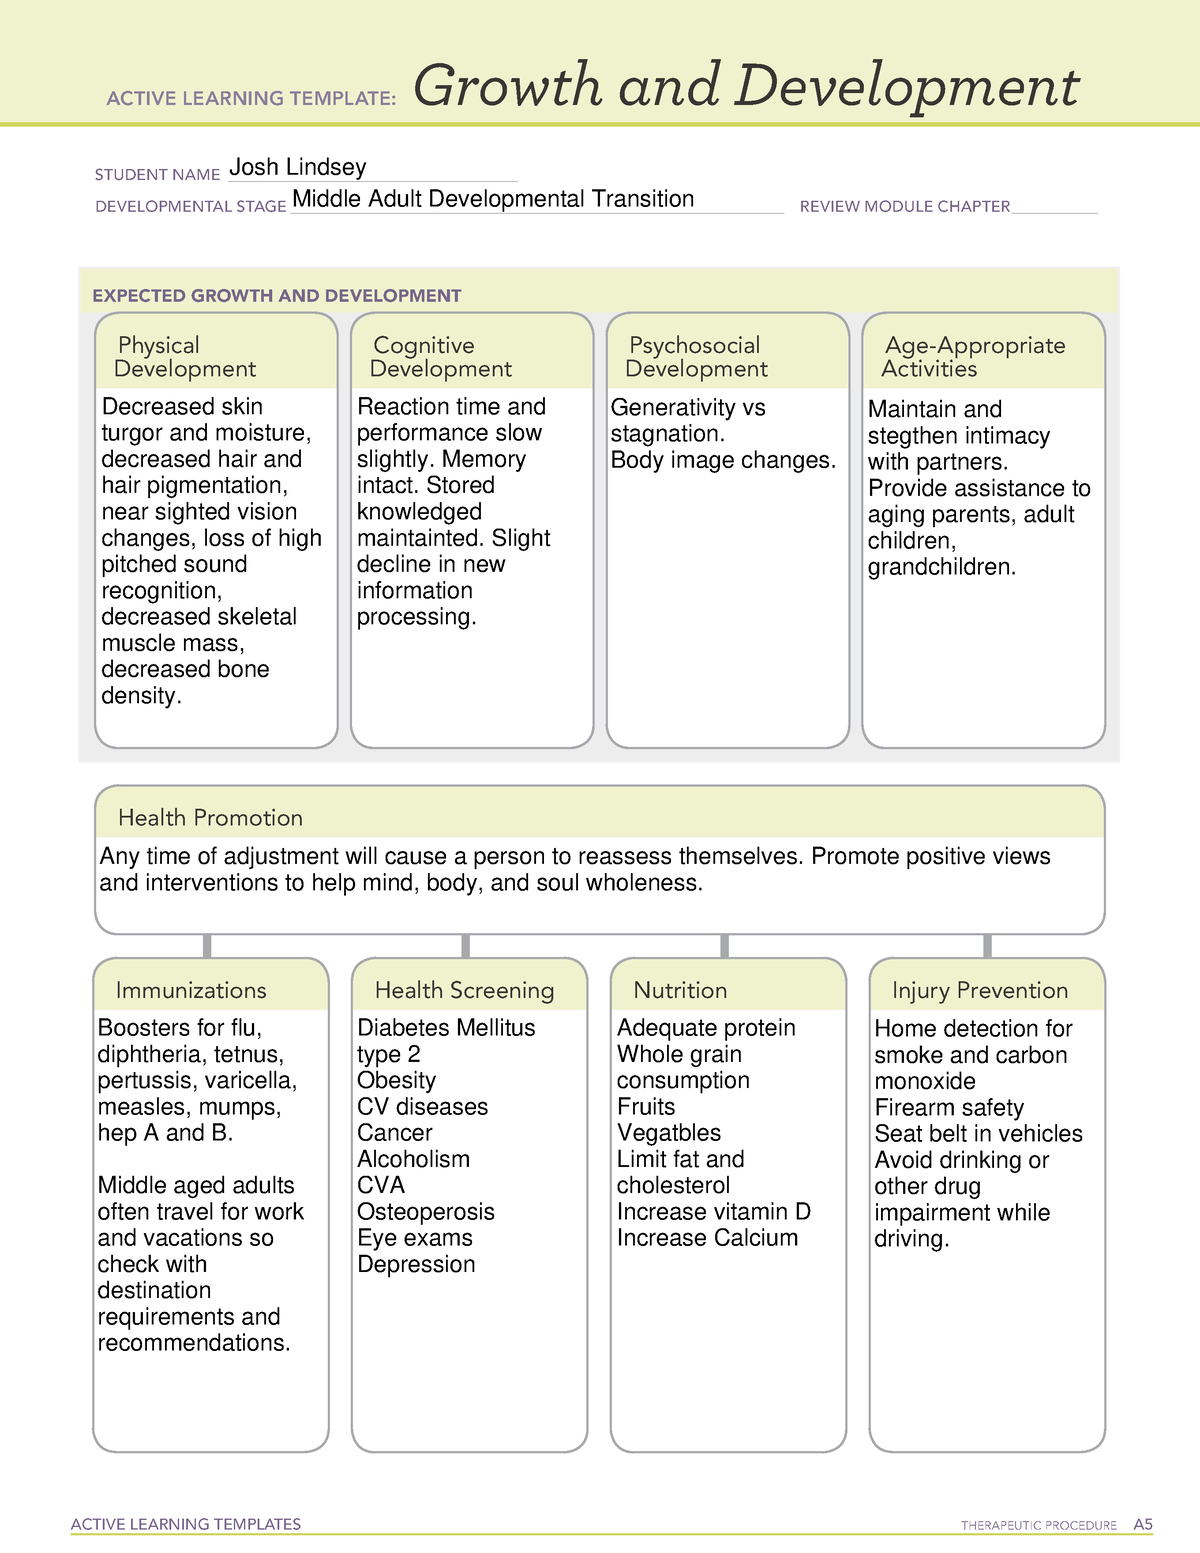 Active Learning Template Gand D Middle Adult Developmental Transition